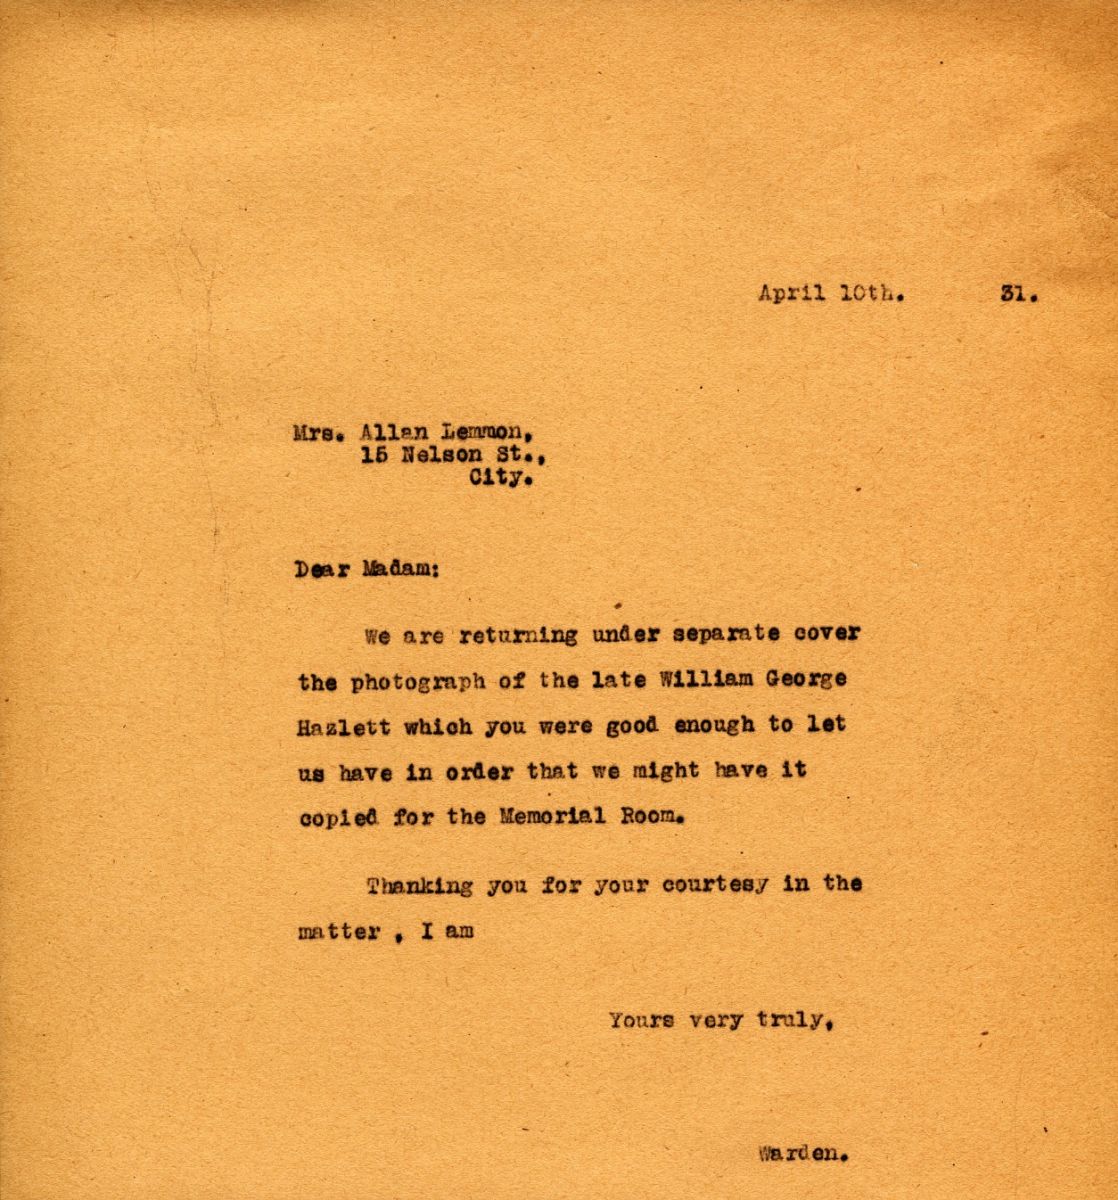 Letter from the Warden to Mrs. Allan Lemmon, 10th April 1931